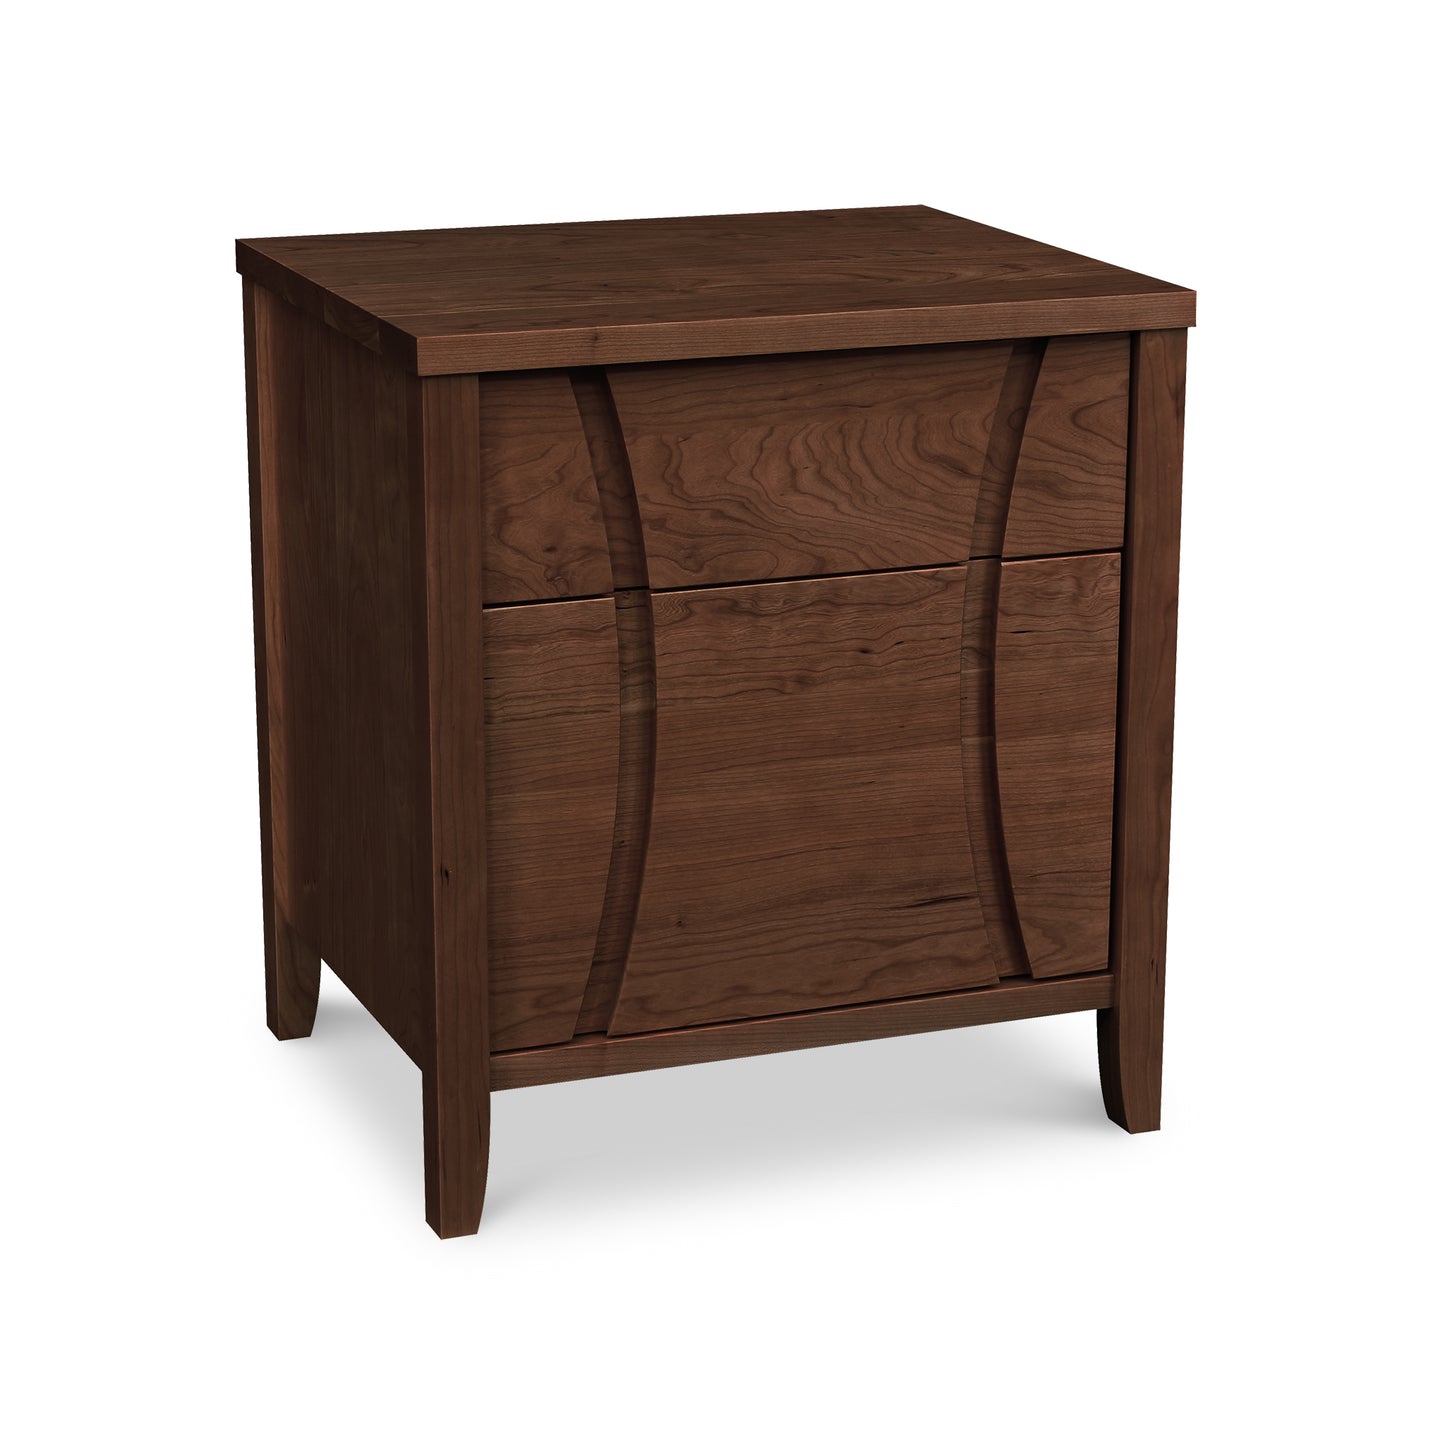 A Lyndon Furniture Holland 1-Drawer Nightstand with Door with two drawers and a wooden top.